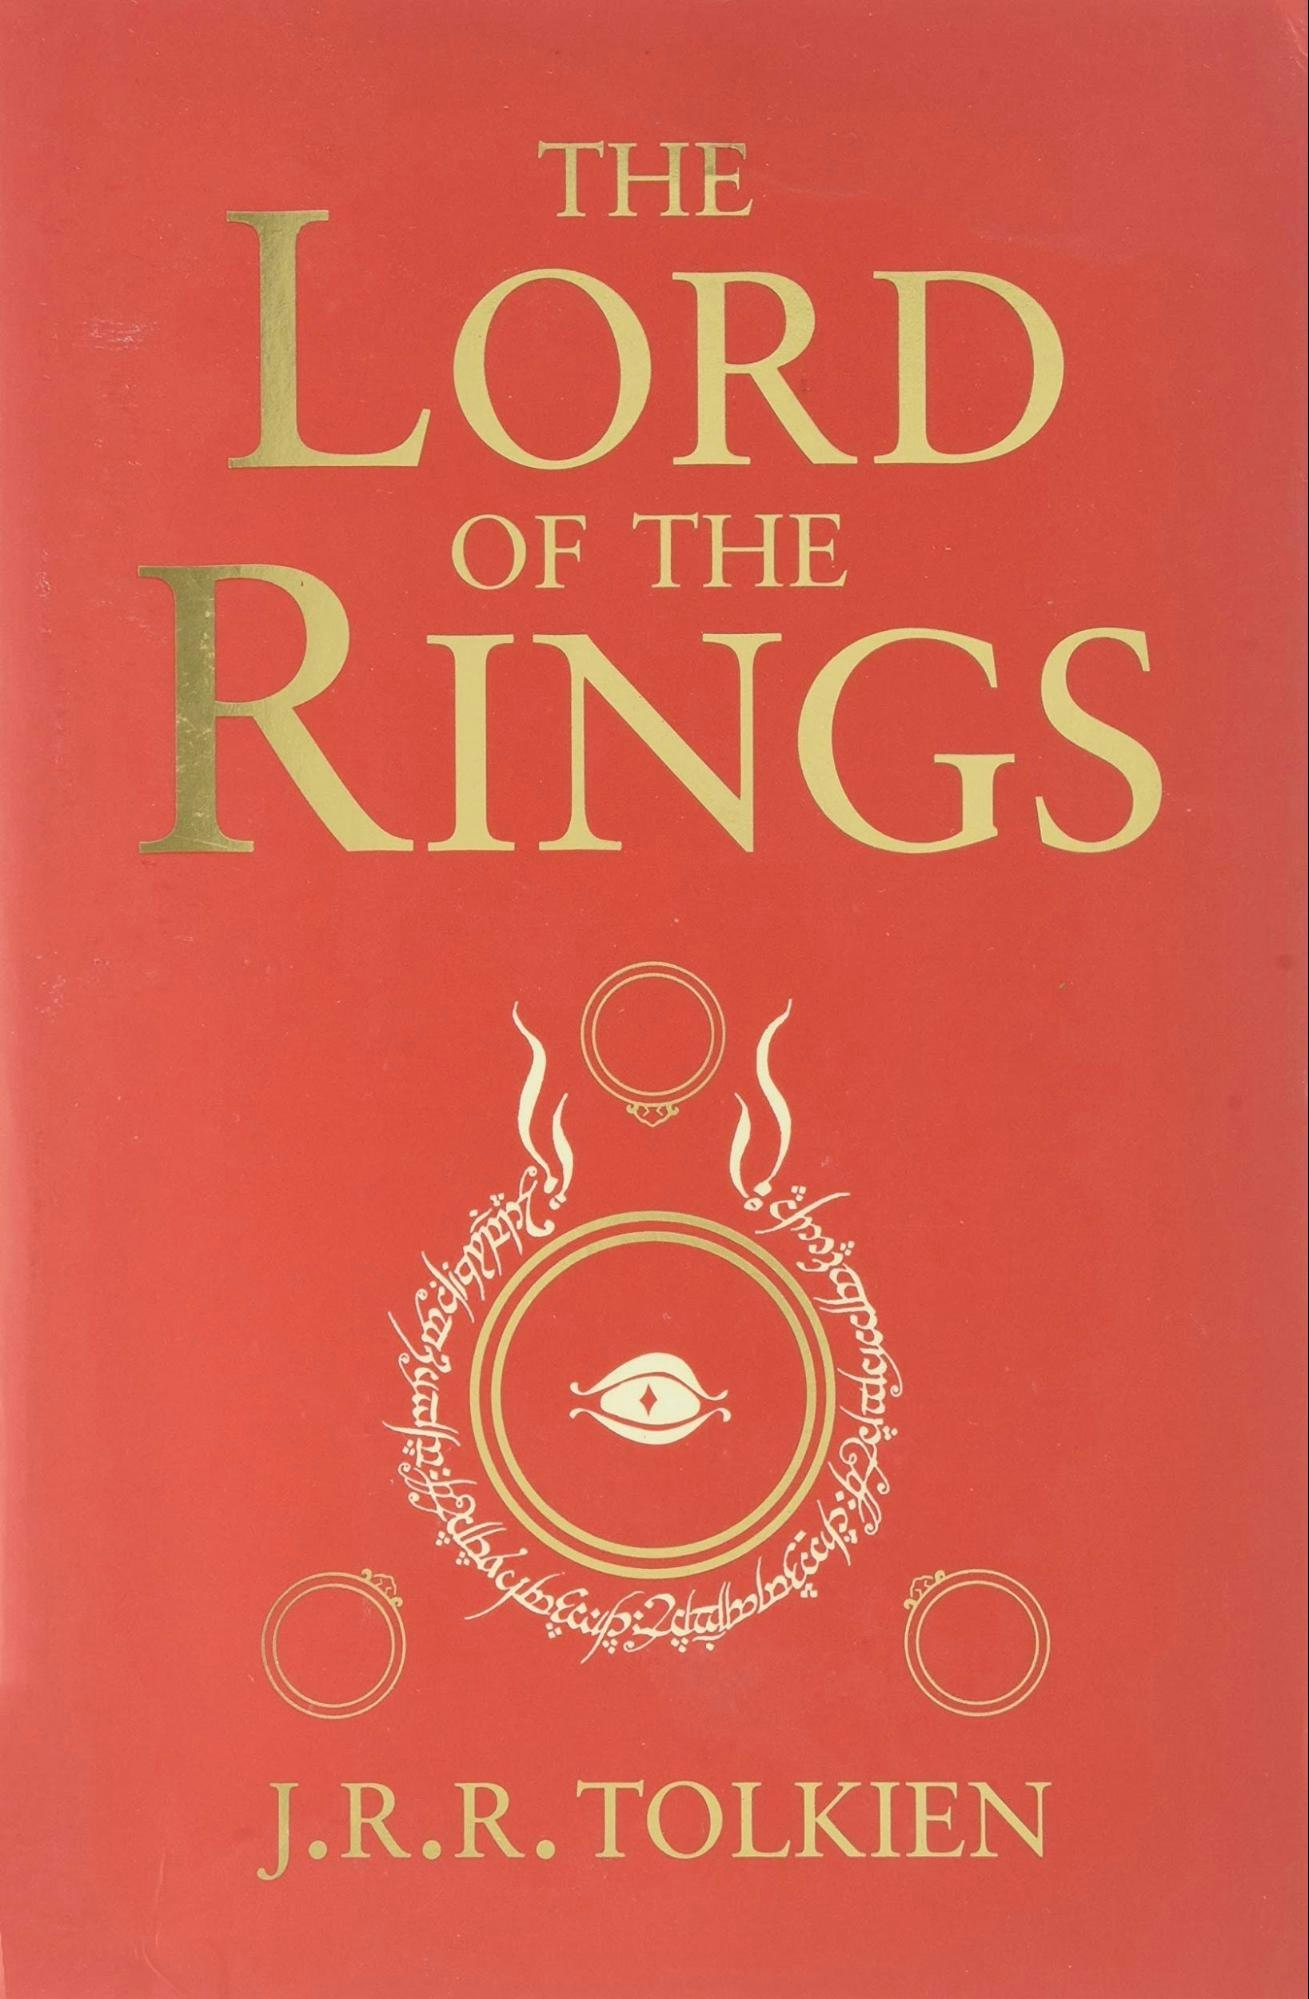 The Lord of the Rings – J.R.R.Tolkien